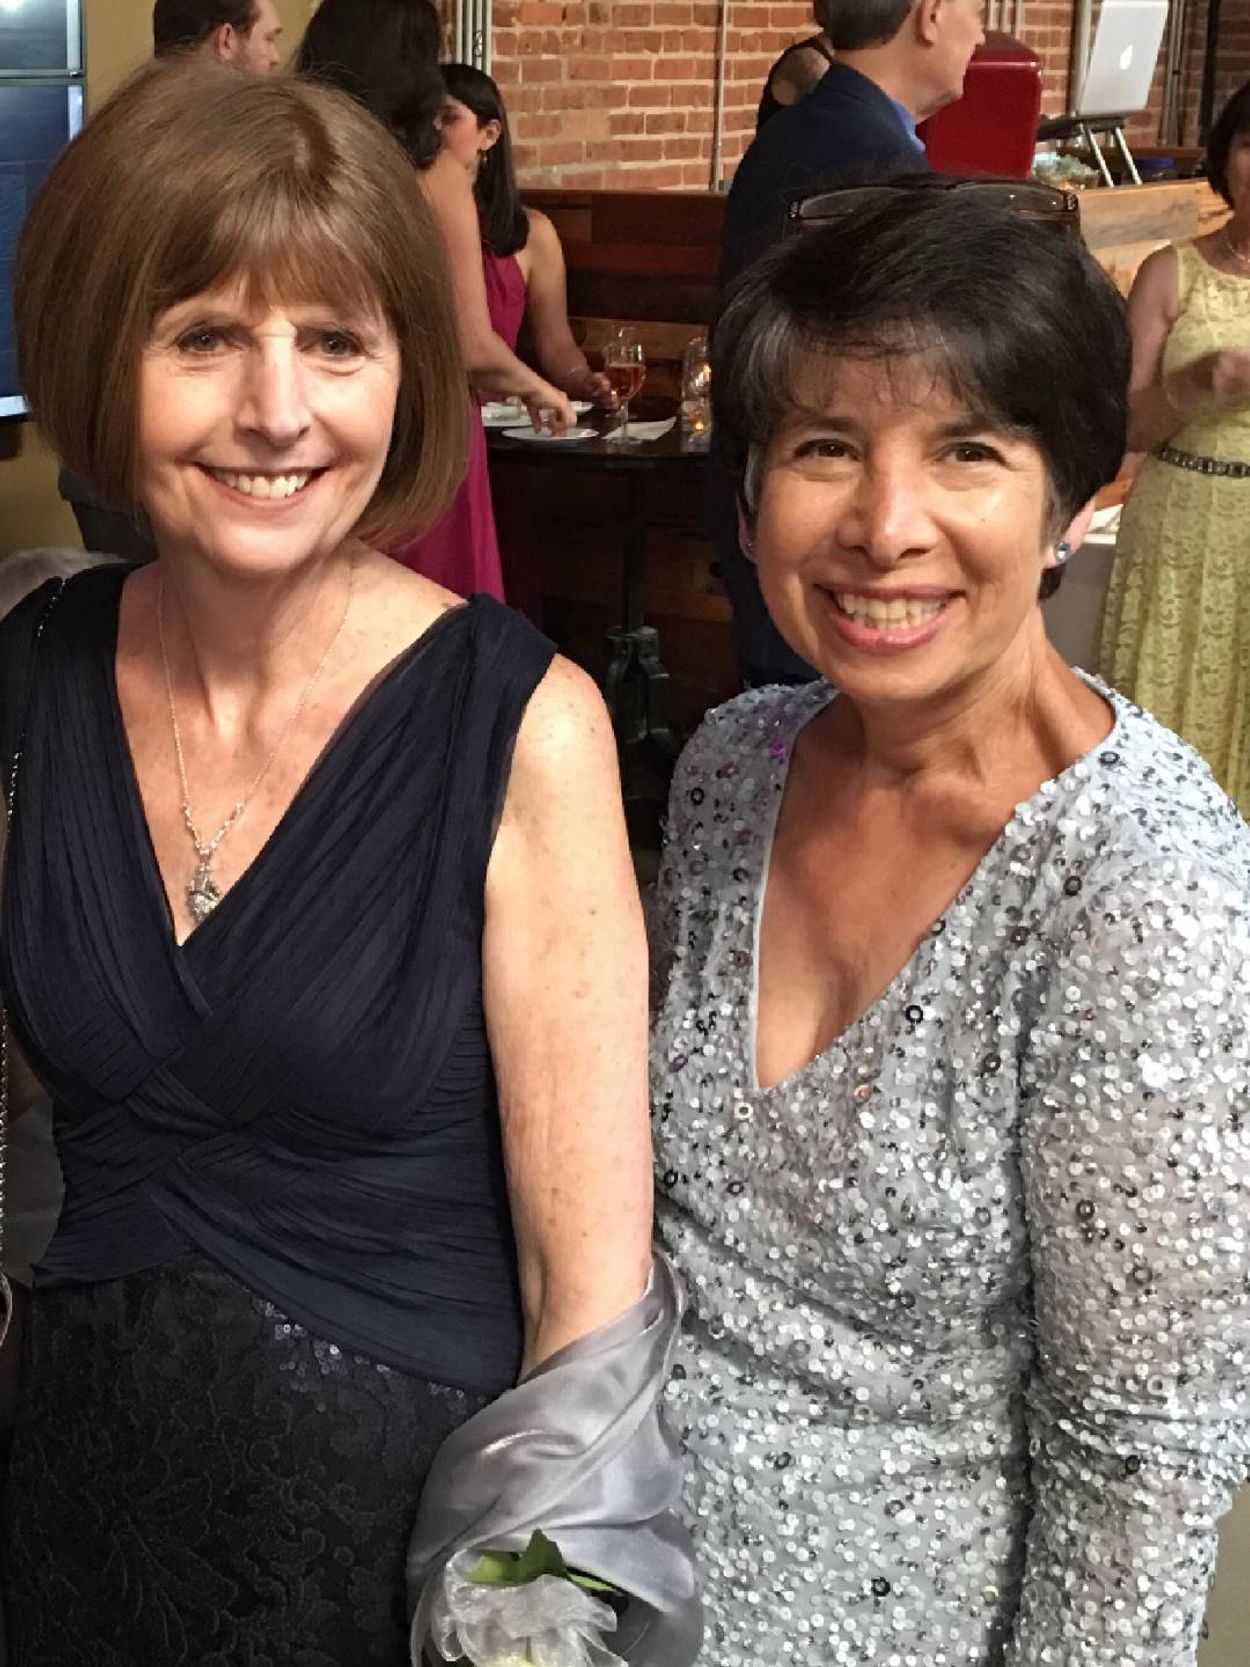 The author and her friend wearing dresses. Next Avenue, Dementia, friend, friendship